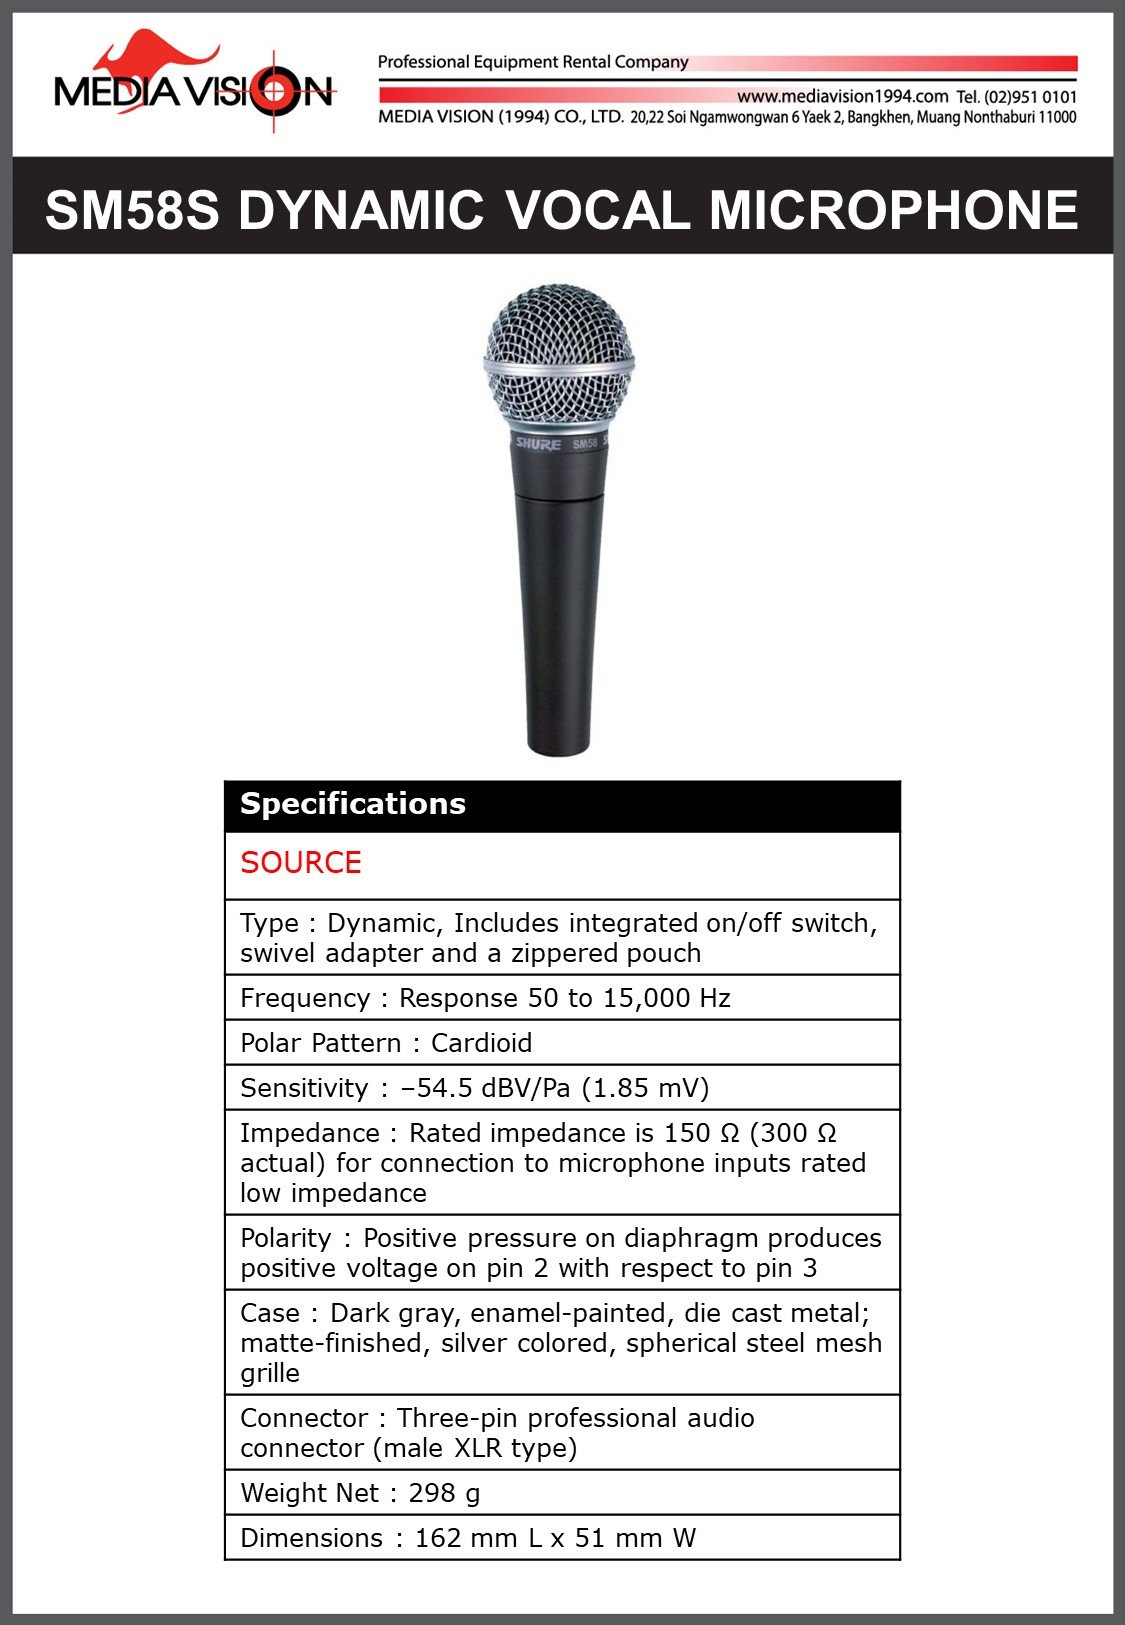 SM58S DYNAMIC VOCAL MICROPHONE